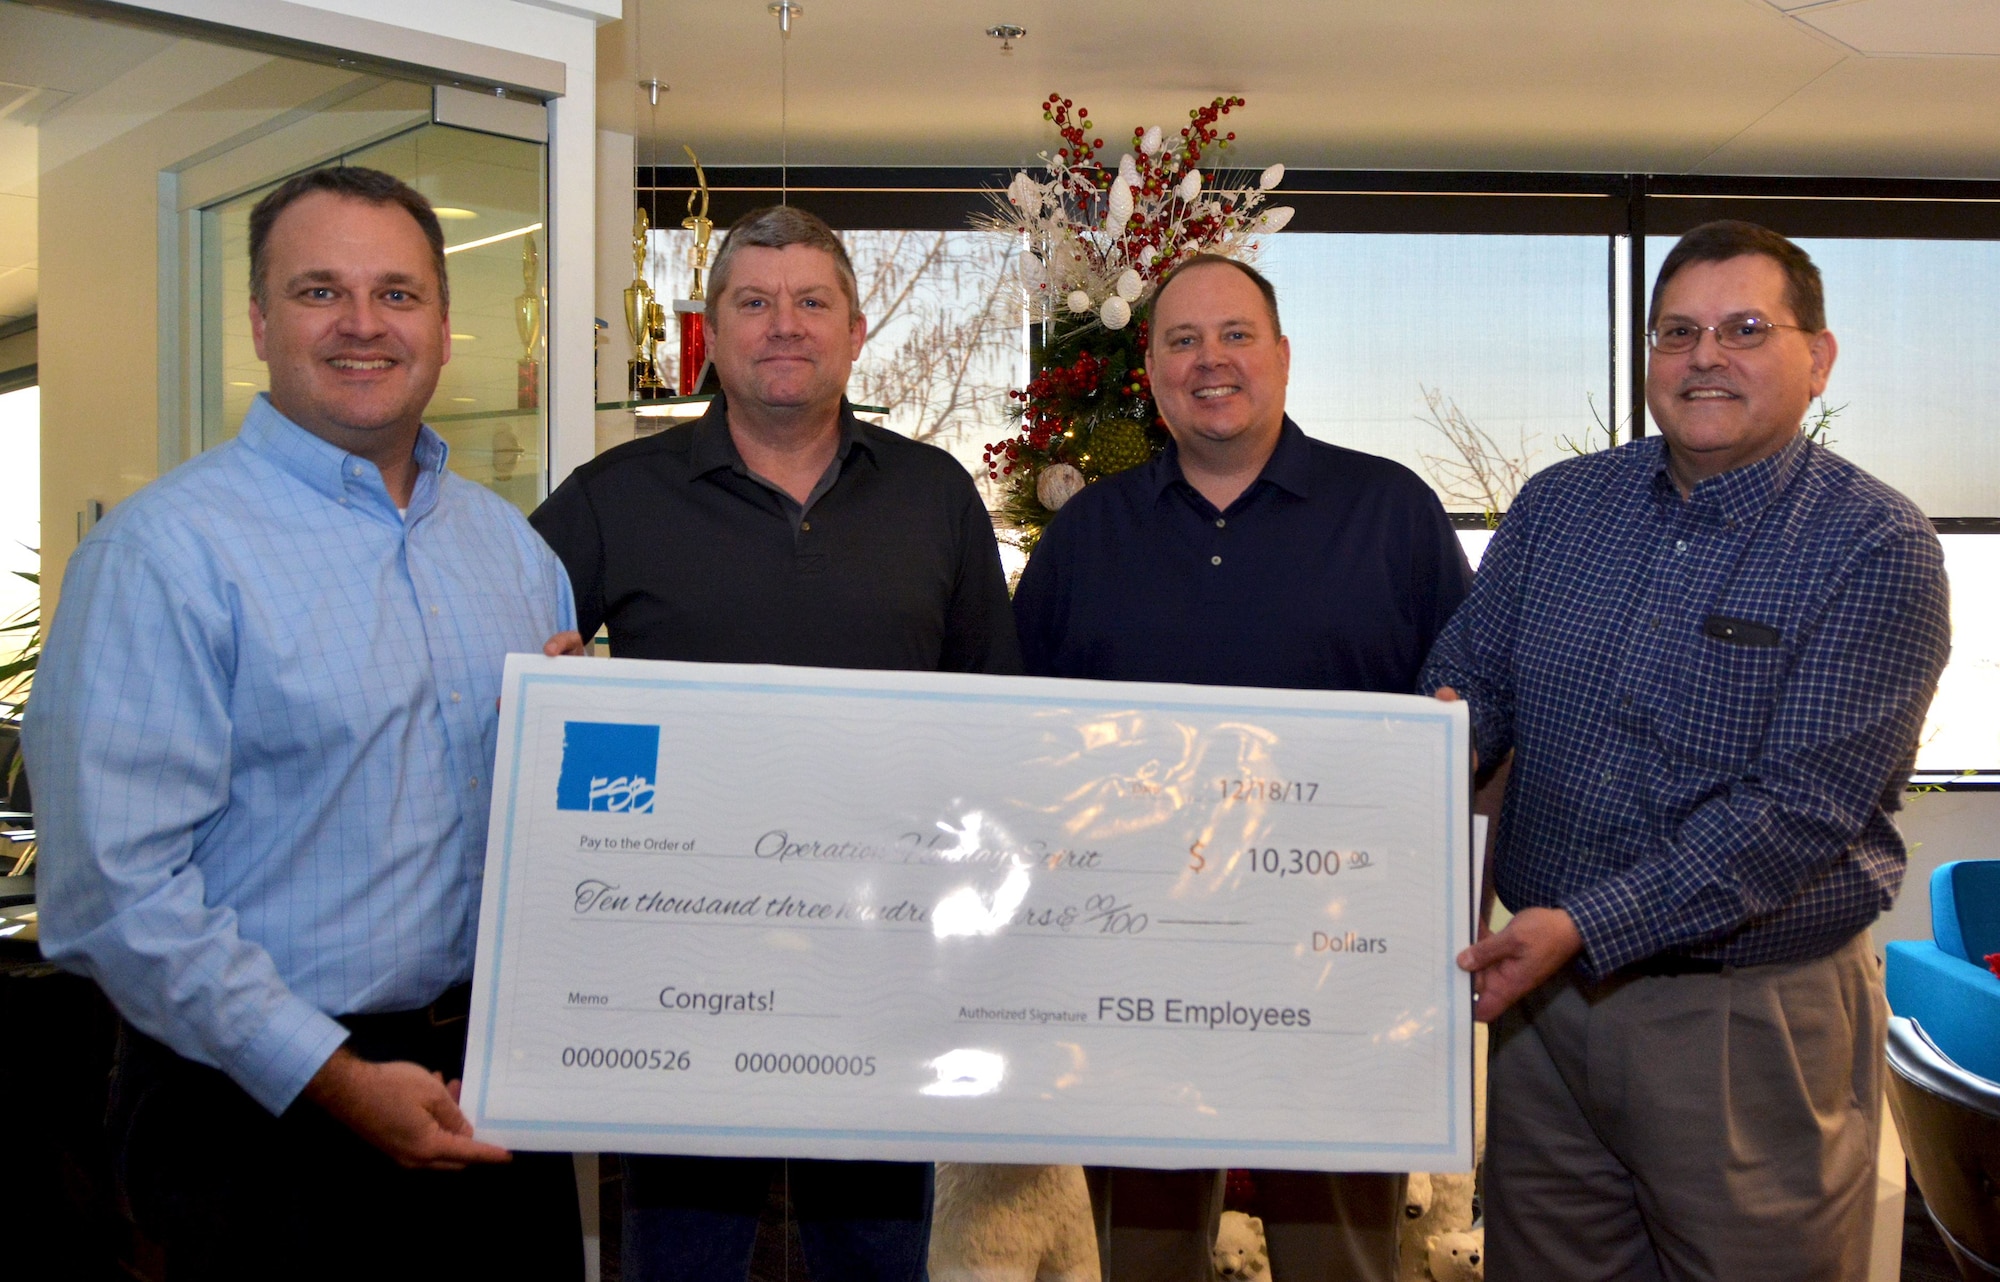 The employees of Frankfurt-Short-Bruza Architects and Engineers in Oklahoma City donated more than $10,000 Dec. 18, 2017, to Operation Holiday Spirit, a private organization that helps military families in need. Members of OHS are made up primarily of Reservists from the 513th Air Control Group and 507th Air Refueling Wing. Gene Brown, Federal Market Principal (far left), and Steve Shrum, Chief Financial Officer(far right), stand for a photo with Joe Wade, 507th Air Refueling Wing facility director (center right), and Ralph Hawkins, 513th Air Control Group executive officer (center left), after delivering the donation. The money will go towards 19 military families through OHS, which has raised more than $36,000 this year. (U.S. Air Force photo/Tech. Sgt. Samantha Mathison)